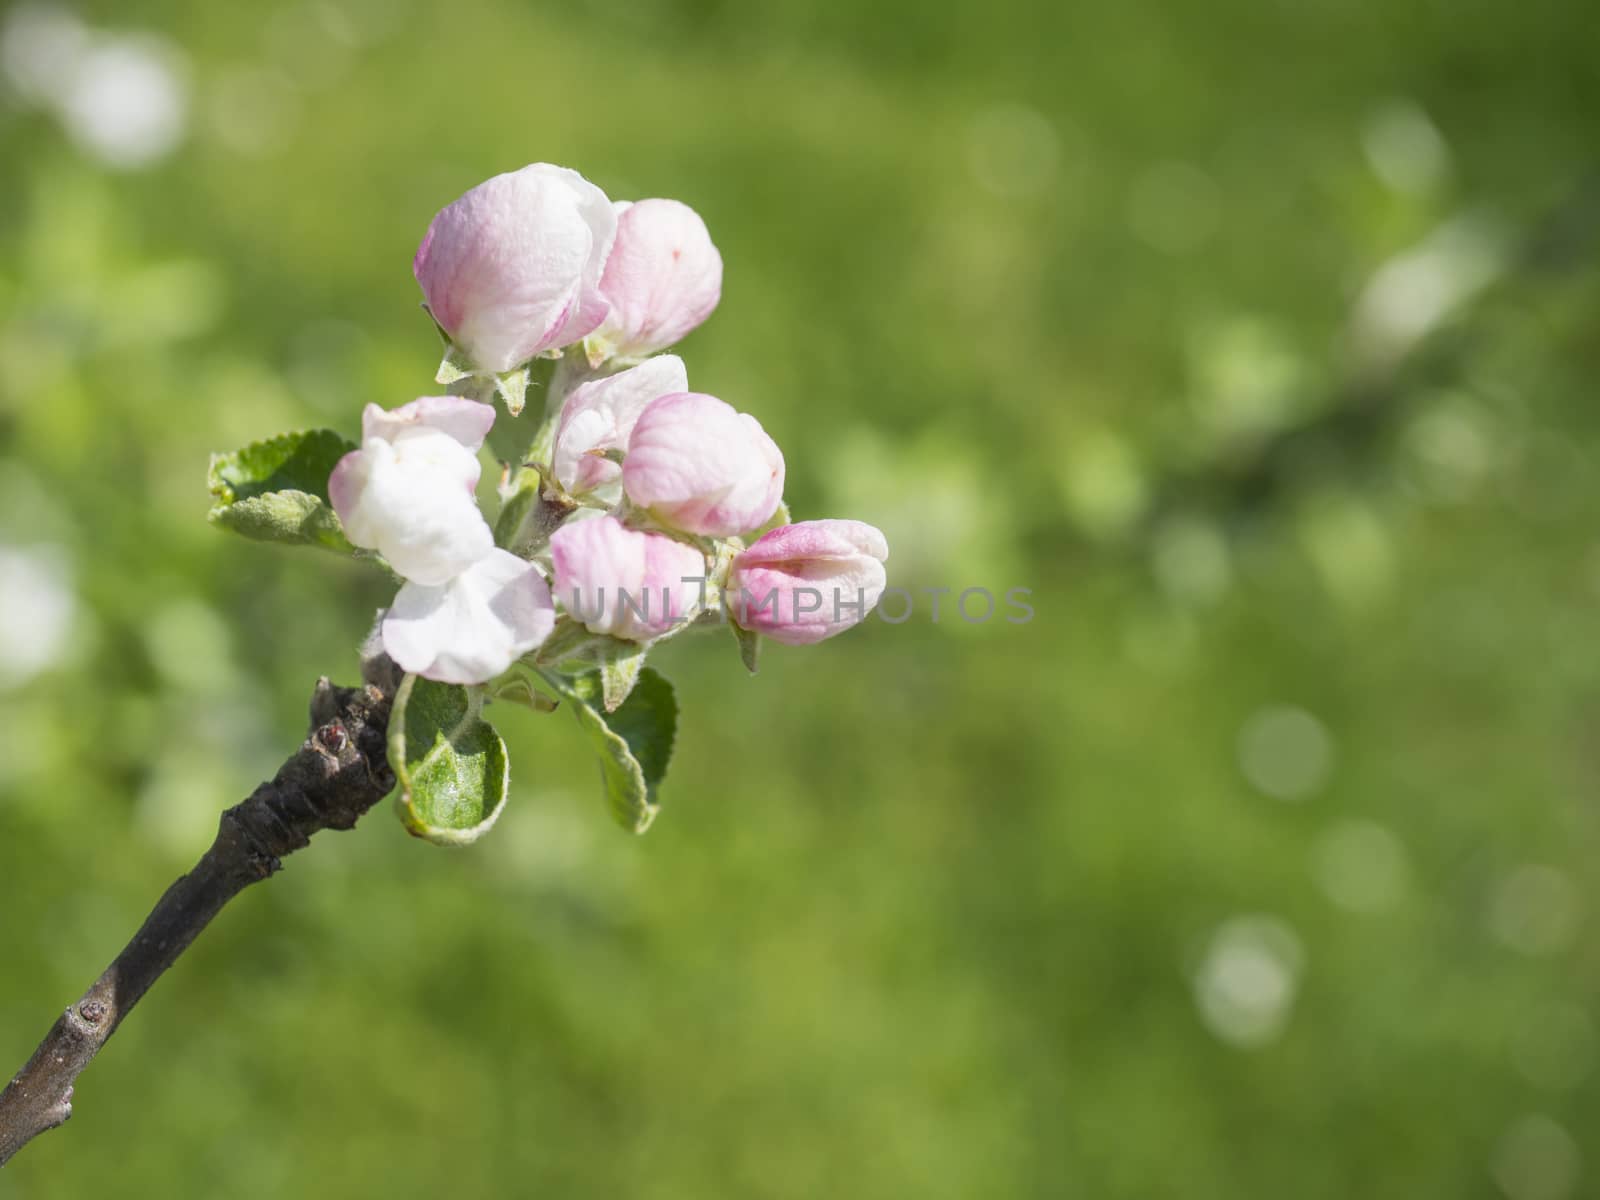 close up beautiful macro blooming pink apple blossom bud flower twing with leaves, selective focus, natural bokeh green background, copy space